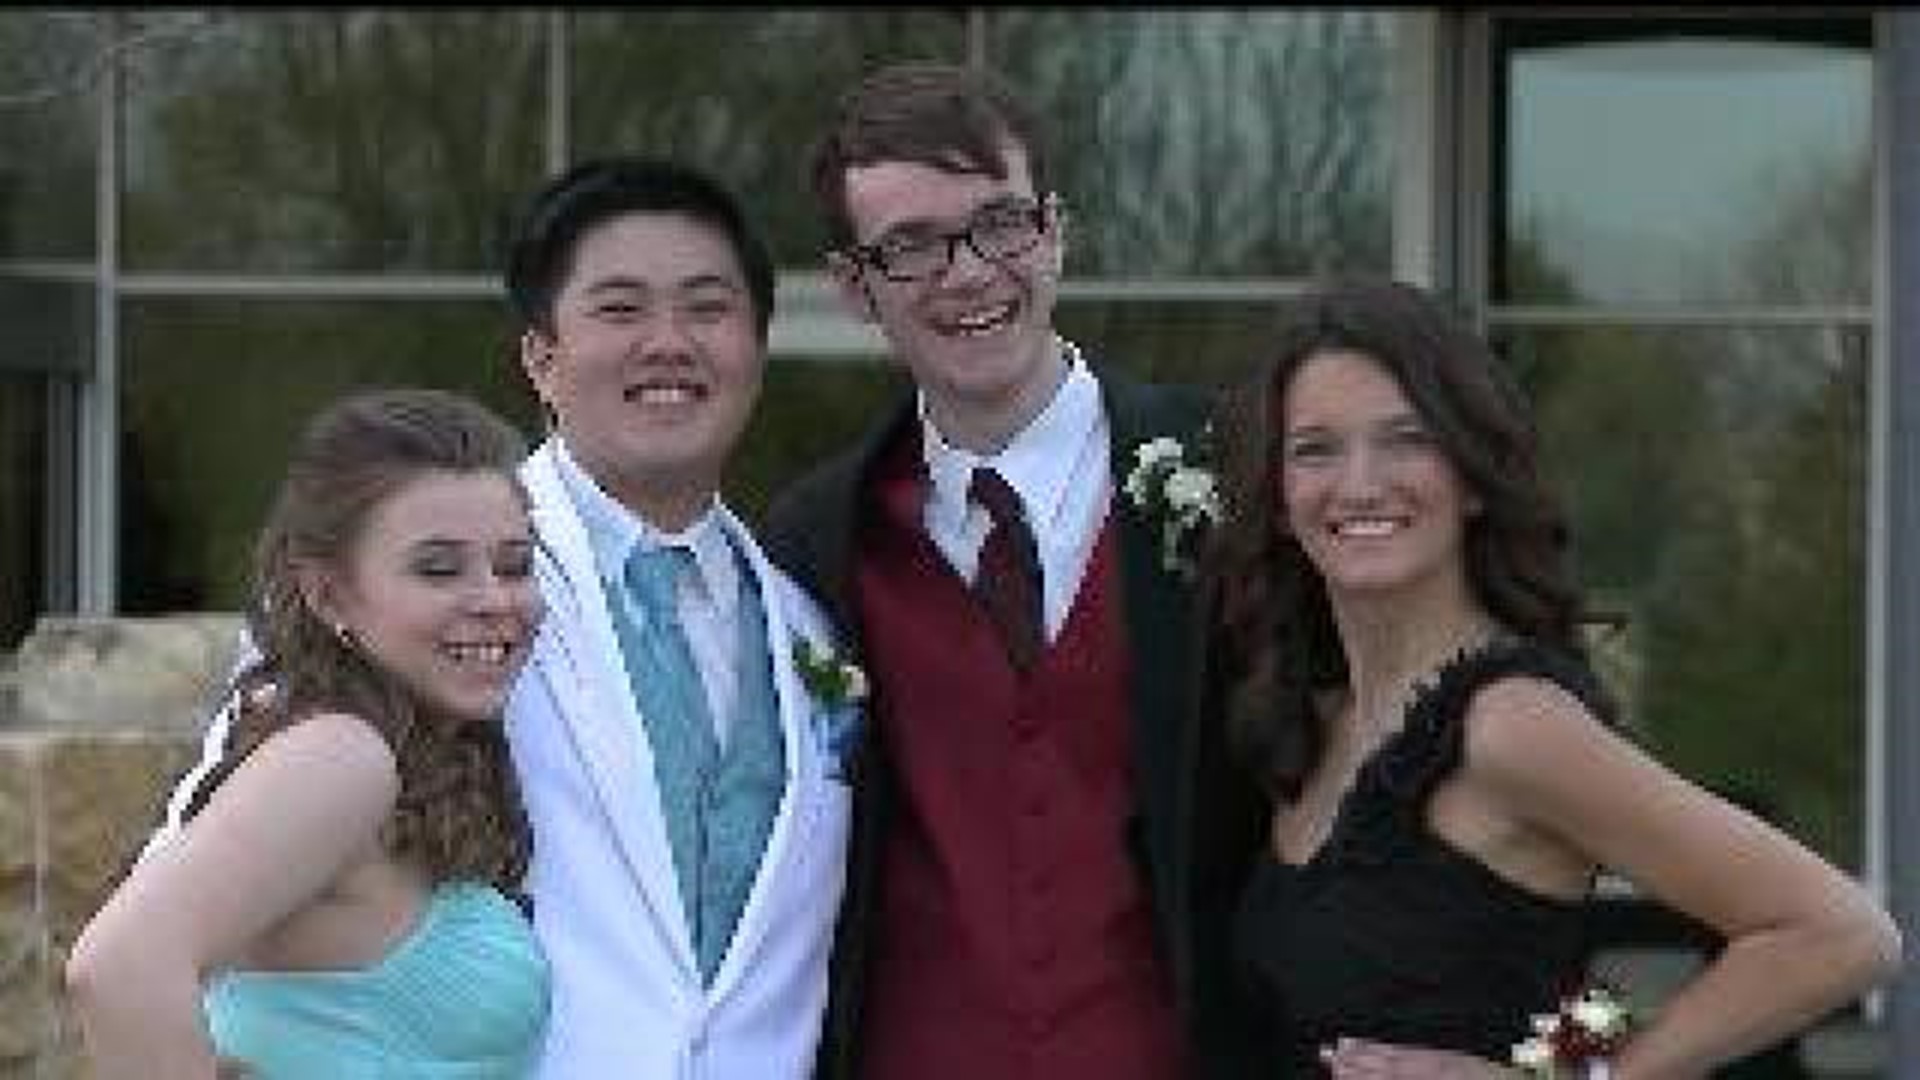 Genesis offers photos for prom goers